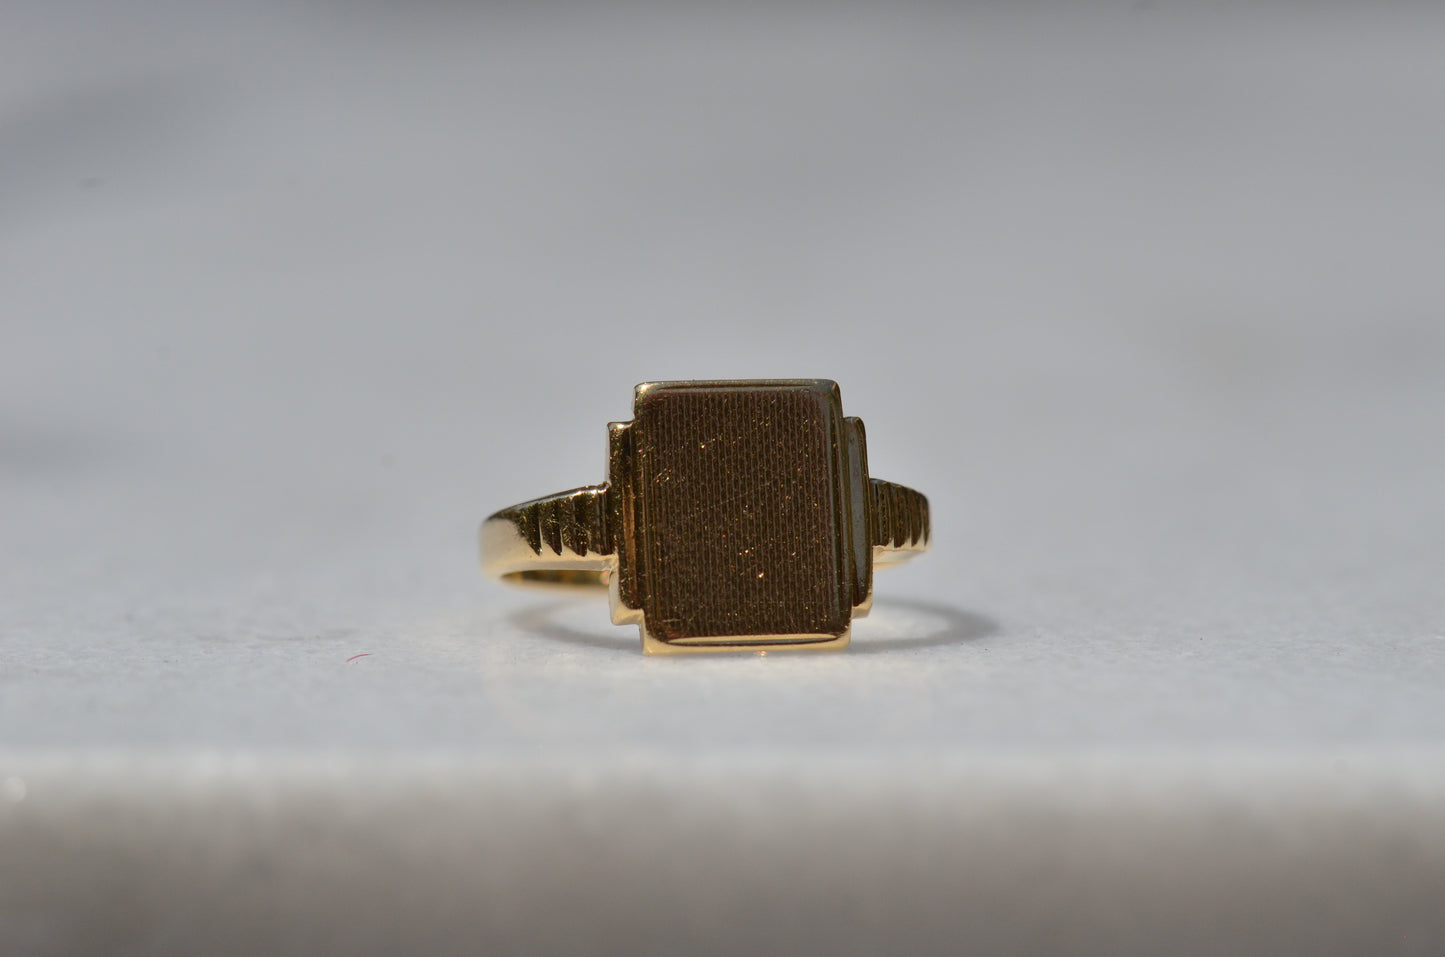 In diffused natural light, the wavy texture of the face of the signet is visible as well as light scratches and scuffs from nearly a century of wear. The ring is viewed turned slightly to the right, to better see the notched shoulders.